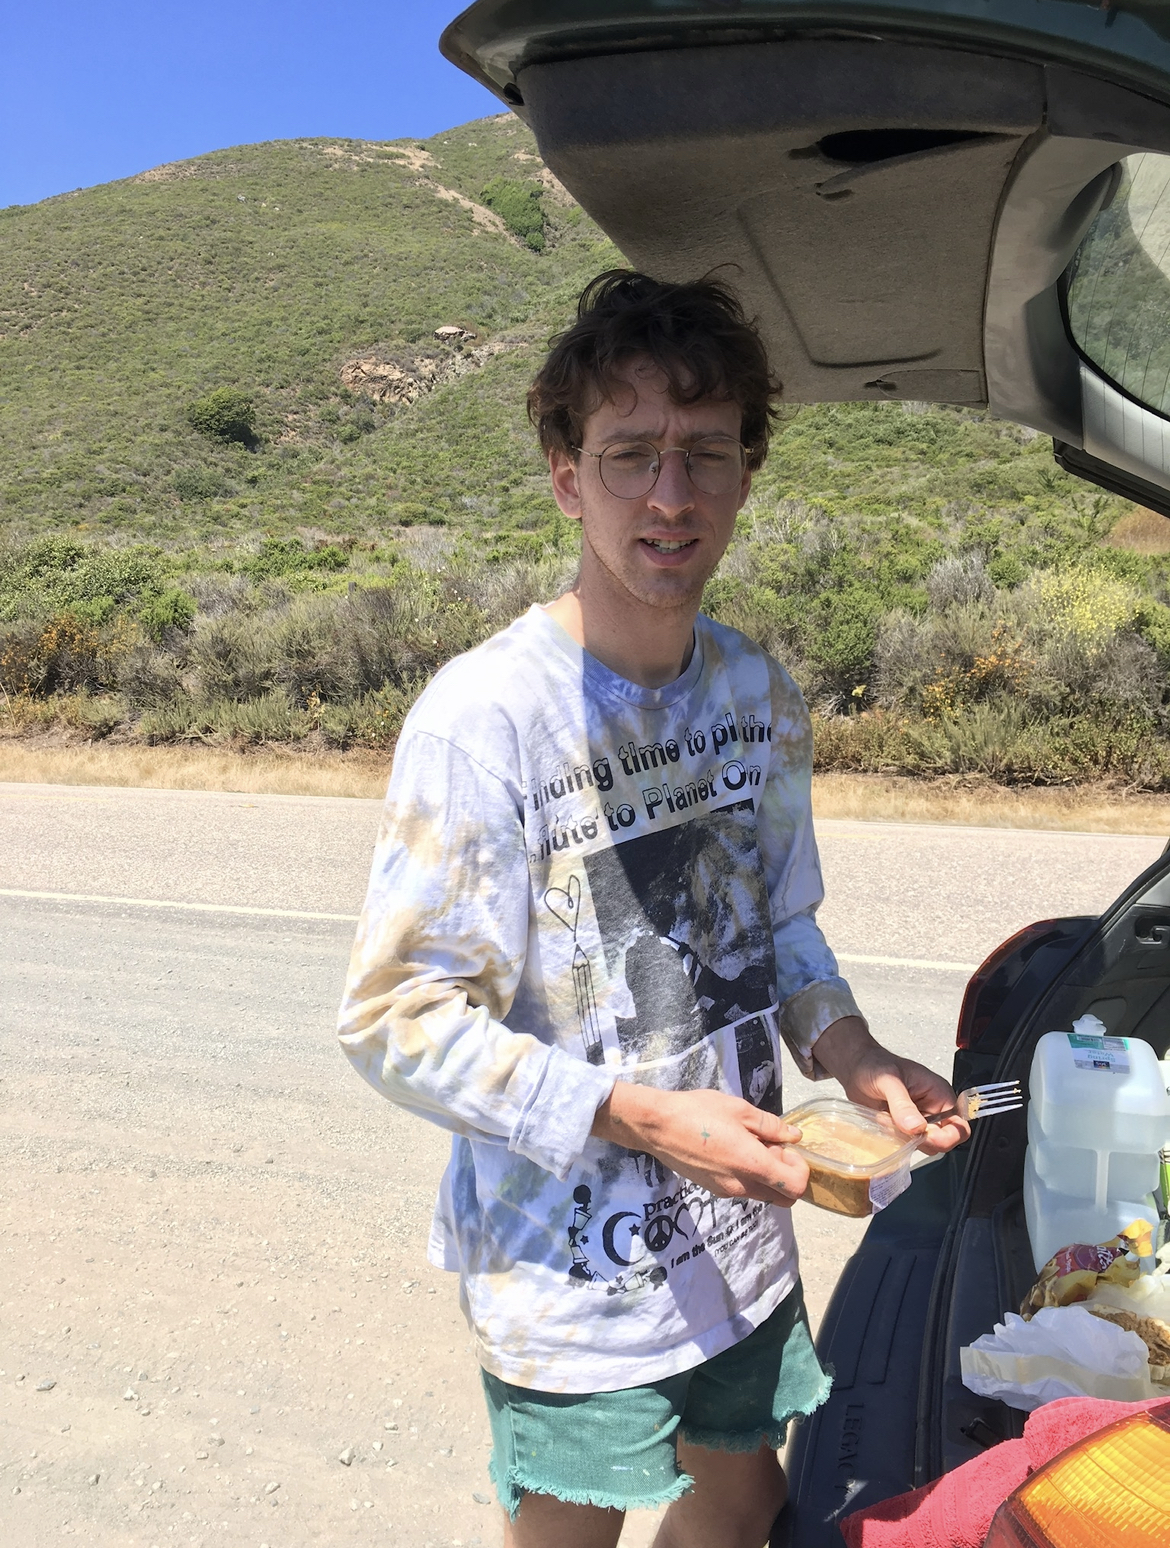 A photo of me, a white man with messy brown hair and round glasses, wearing a long sleeve tie dye t-shirt and green shorts made from cut off jeans. I am standing on the side of Highway 1 in Big Sur, California. Behind me is a verdant green hill and a small portion of clear blue sky. I'm standing behind the open hatch of a hatchback vehicle, holding a container of almond butter and a fork.